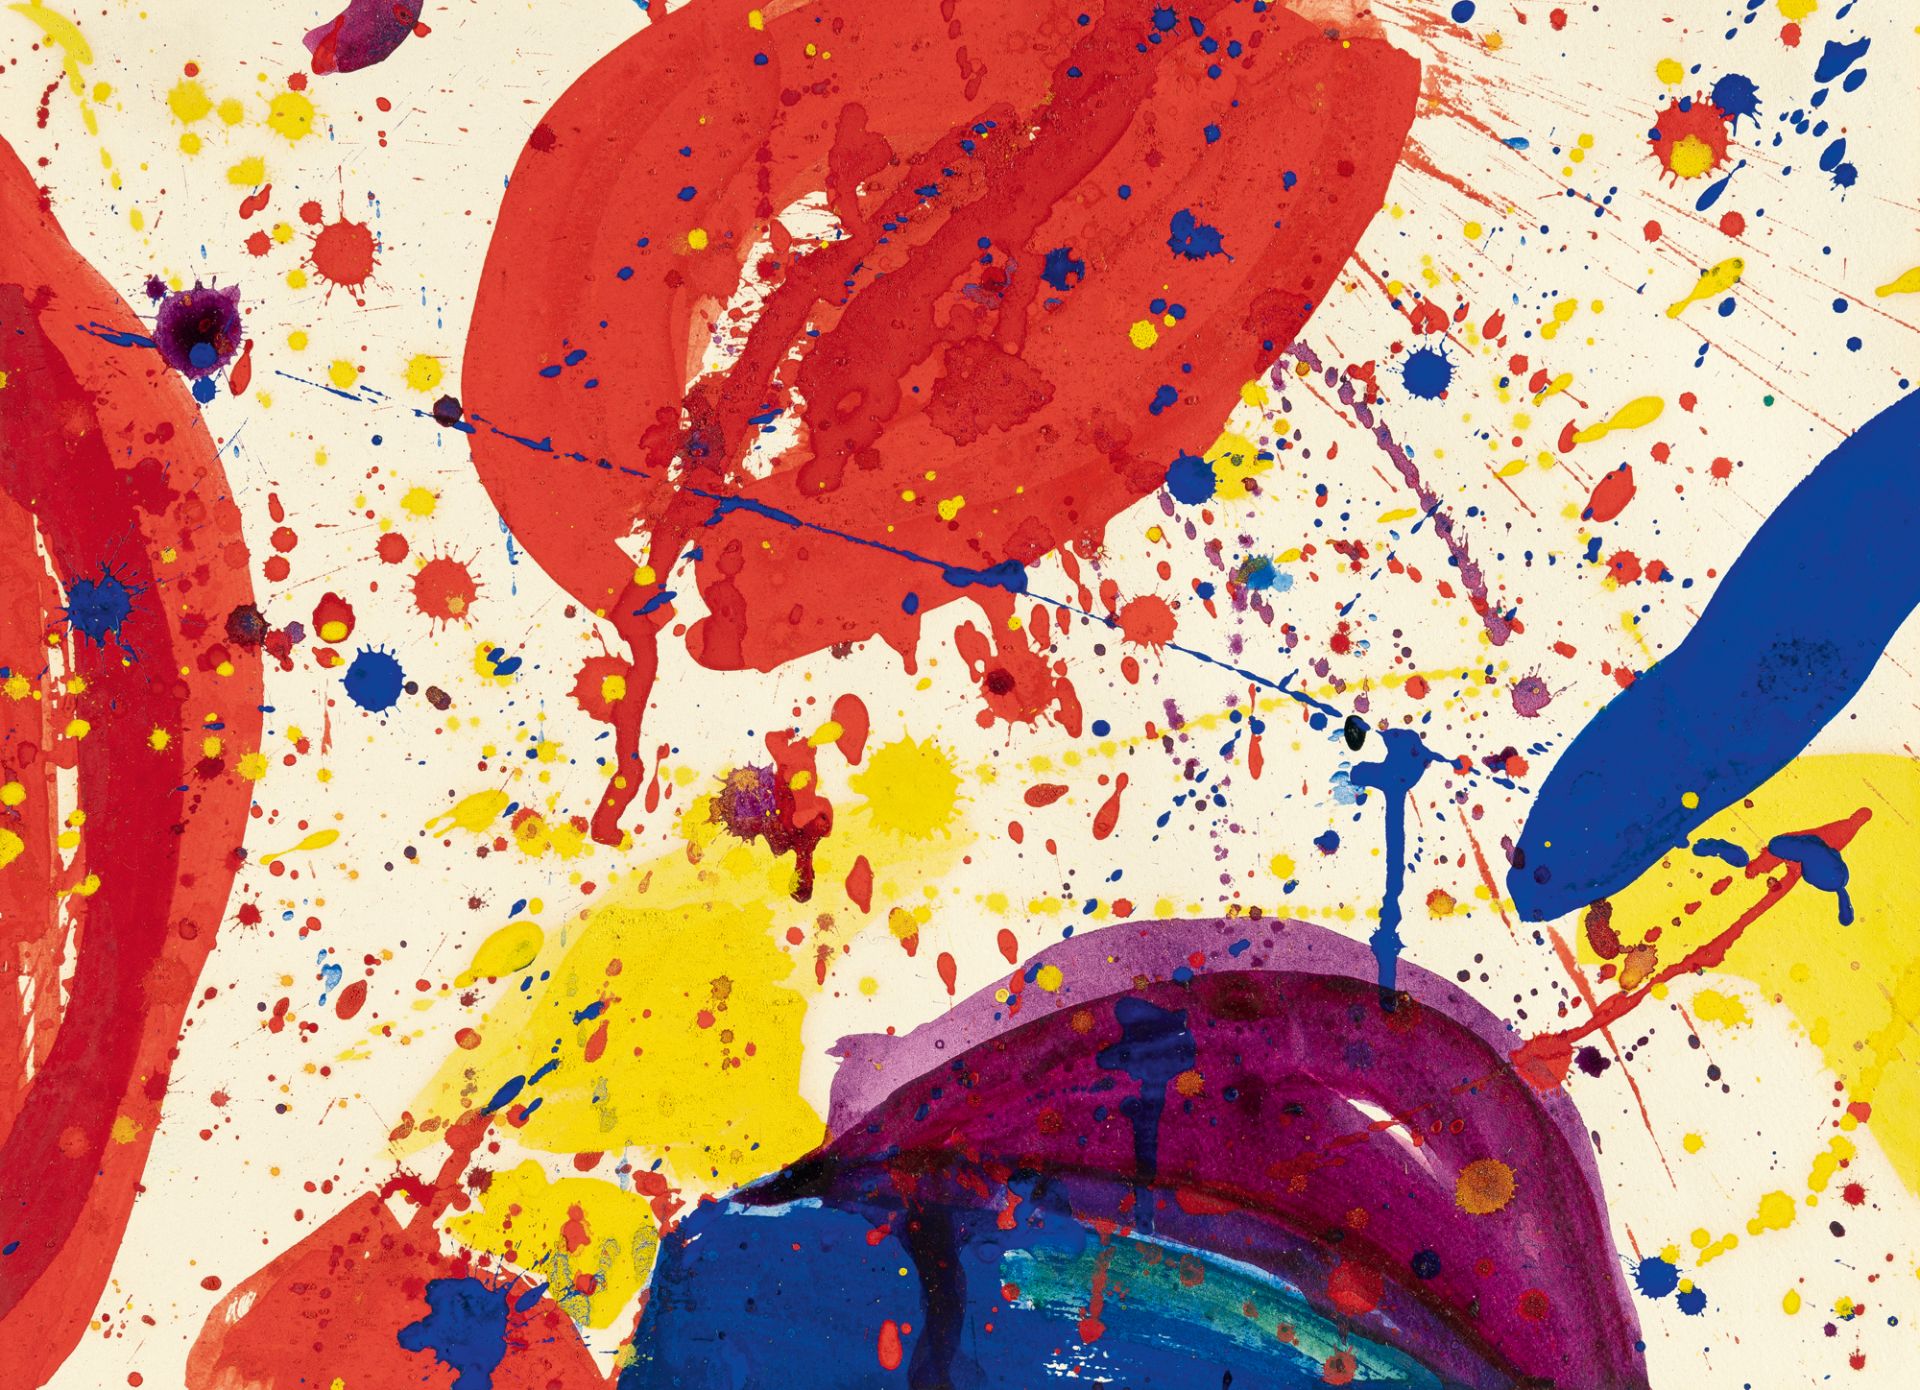 Sam Francis, Untitled ("Tokyo").Mixed media with gouache and watercolour on wove. 1964. Ca. 24 x